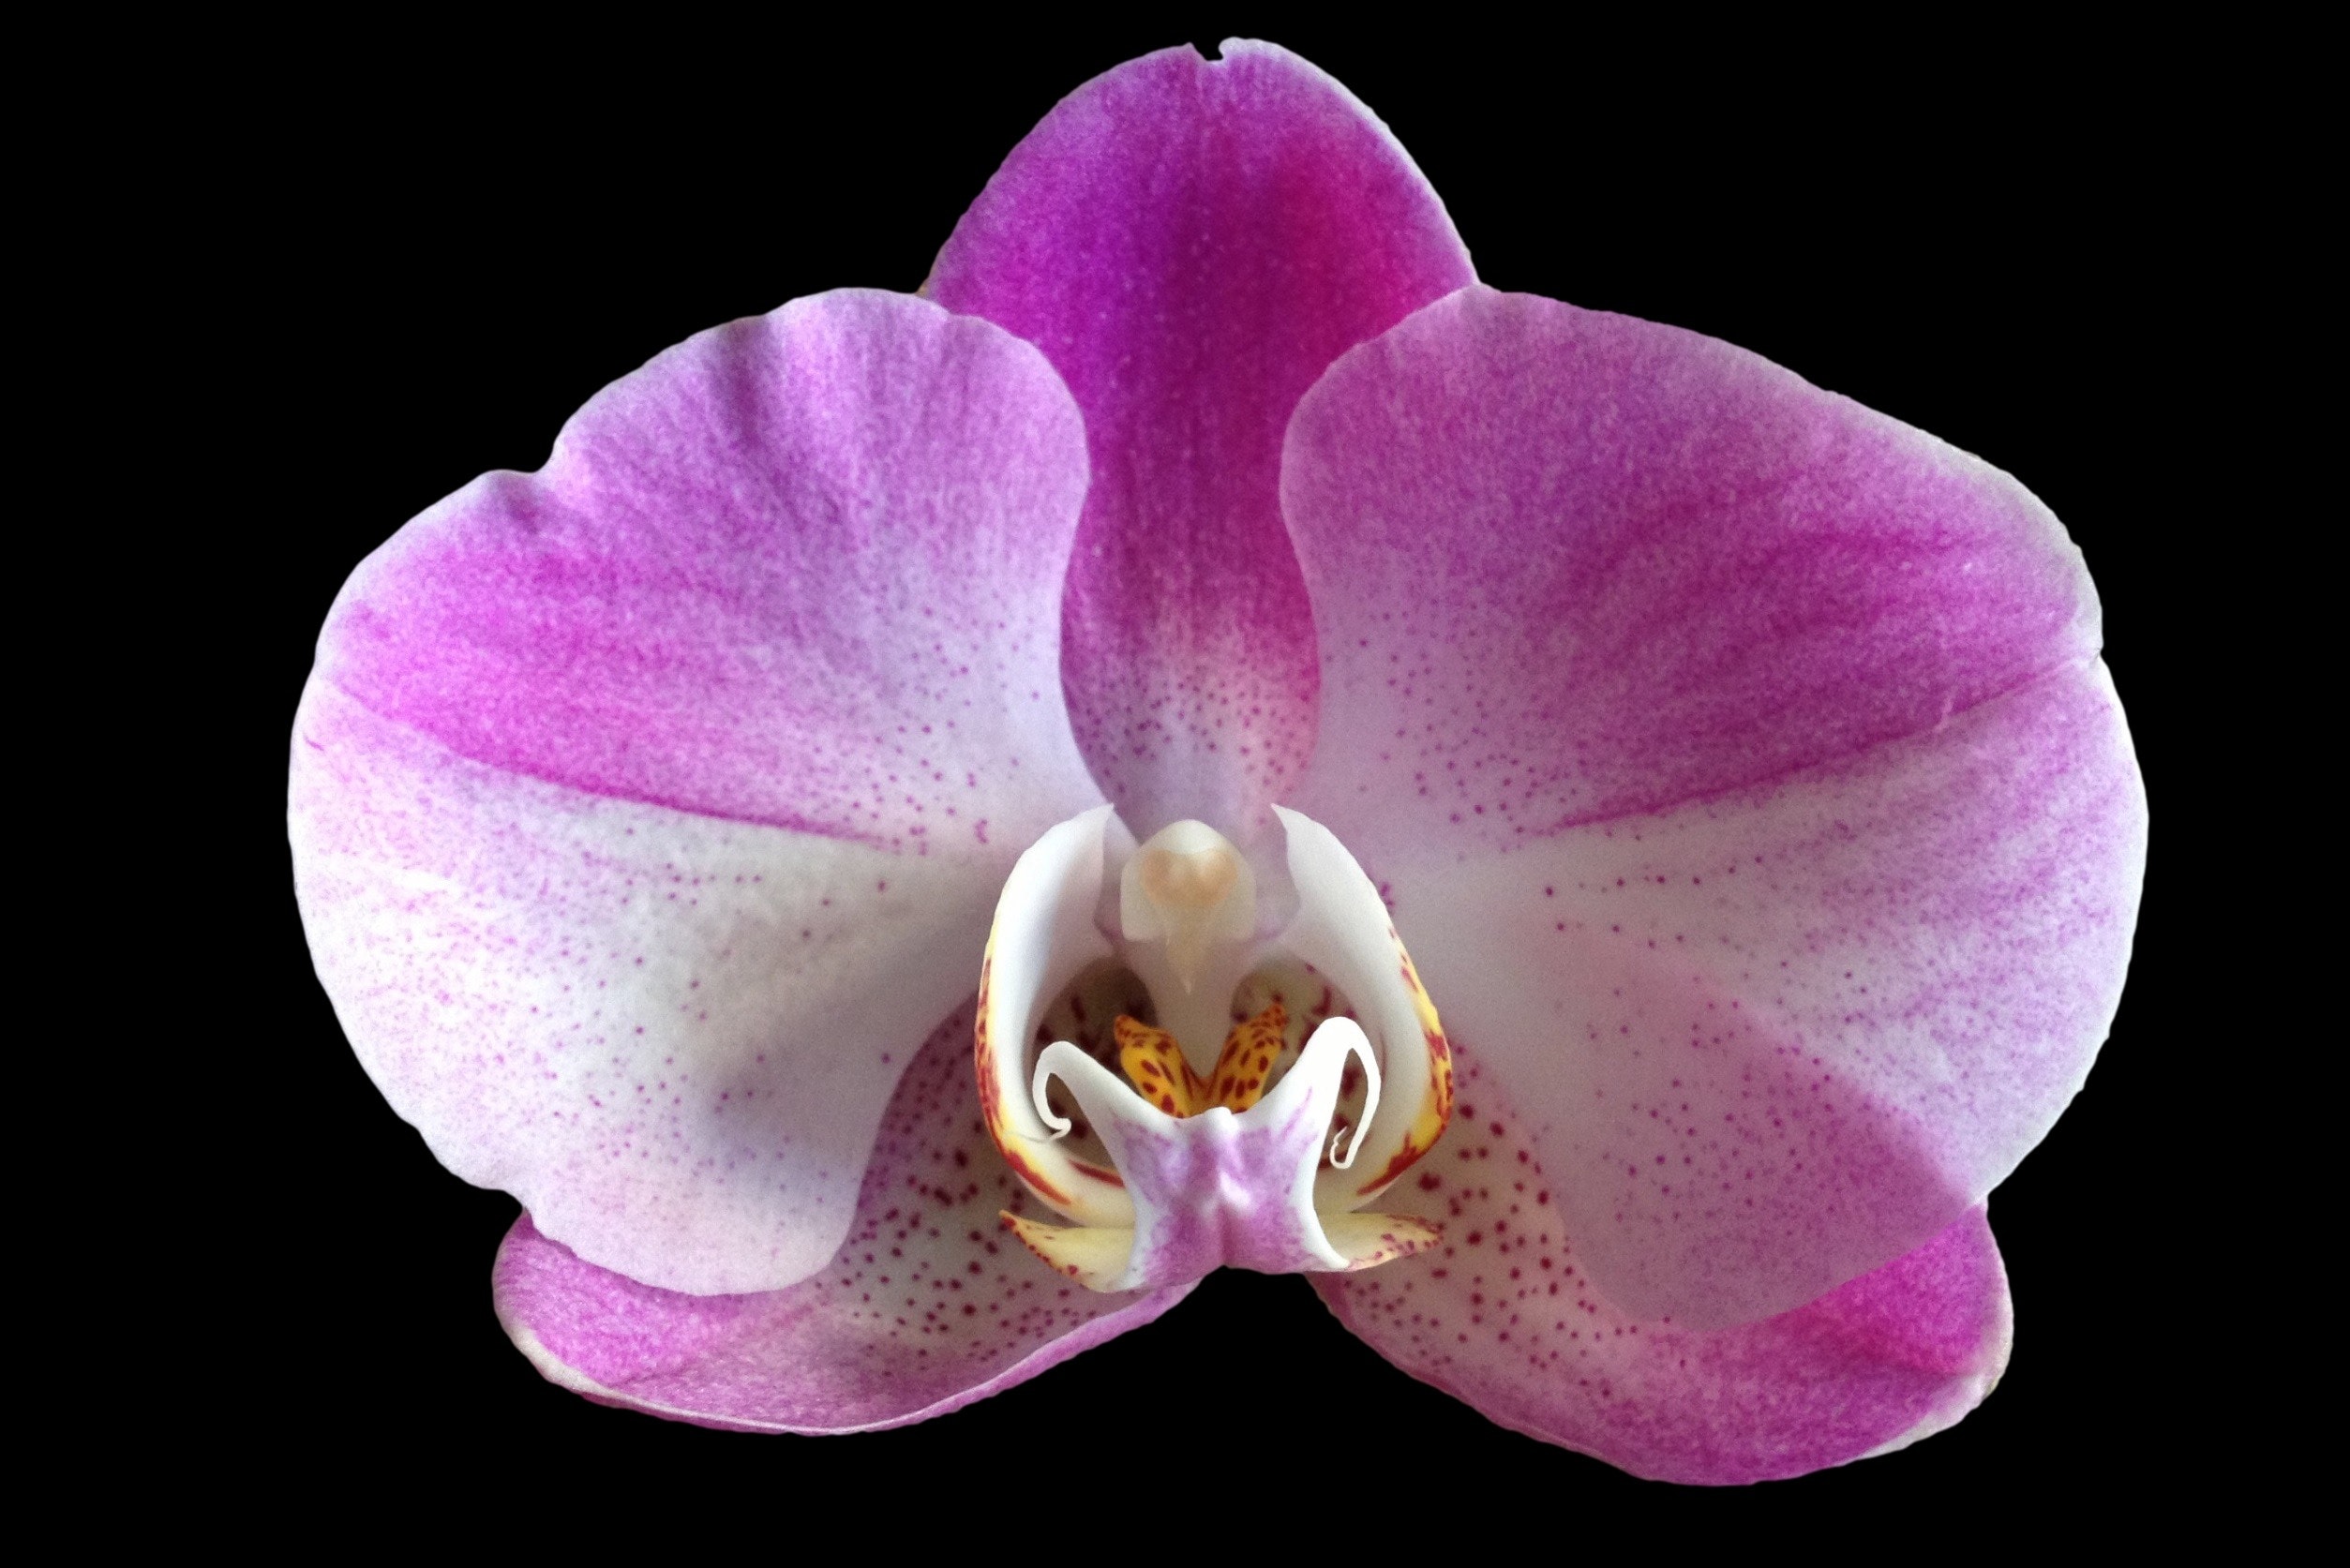 Purple and white orchid flower photo